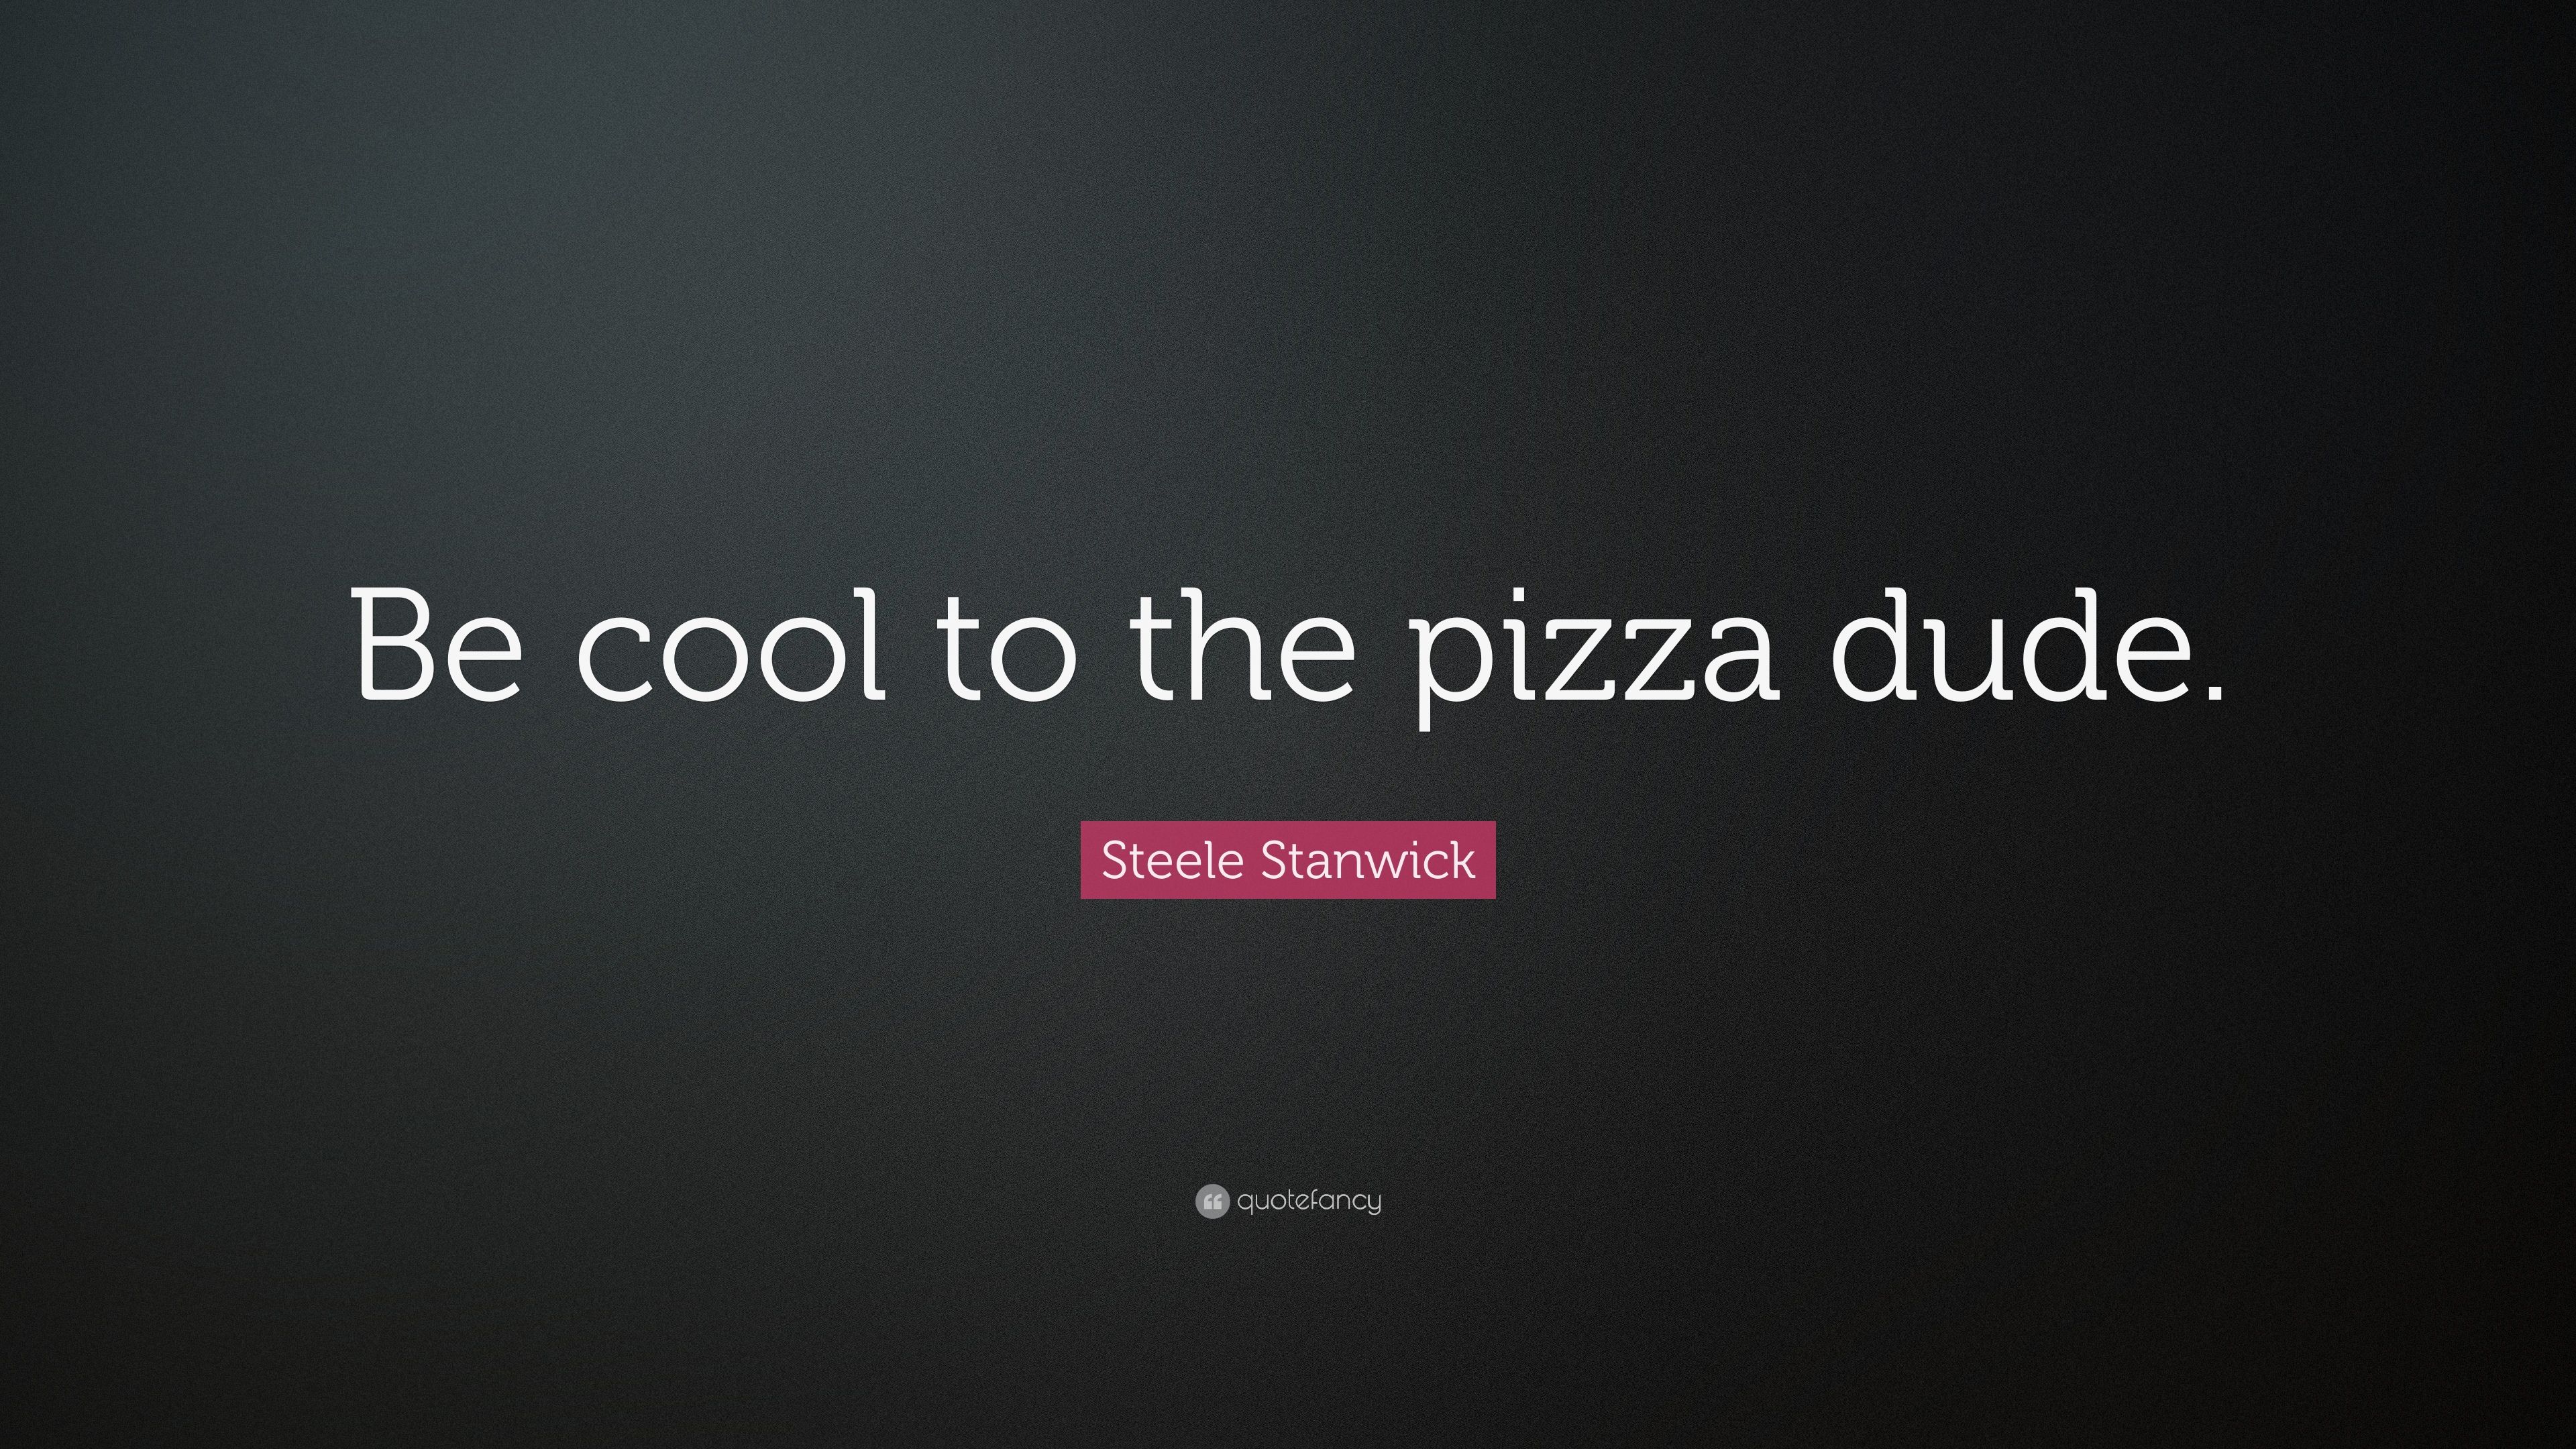 Steele Stanwick Quote: “Be cool to the pizza dude.” 7 wallpaper